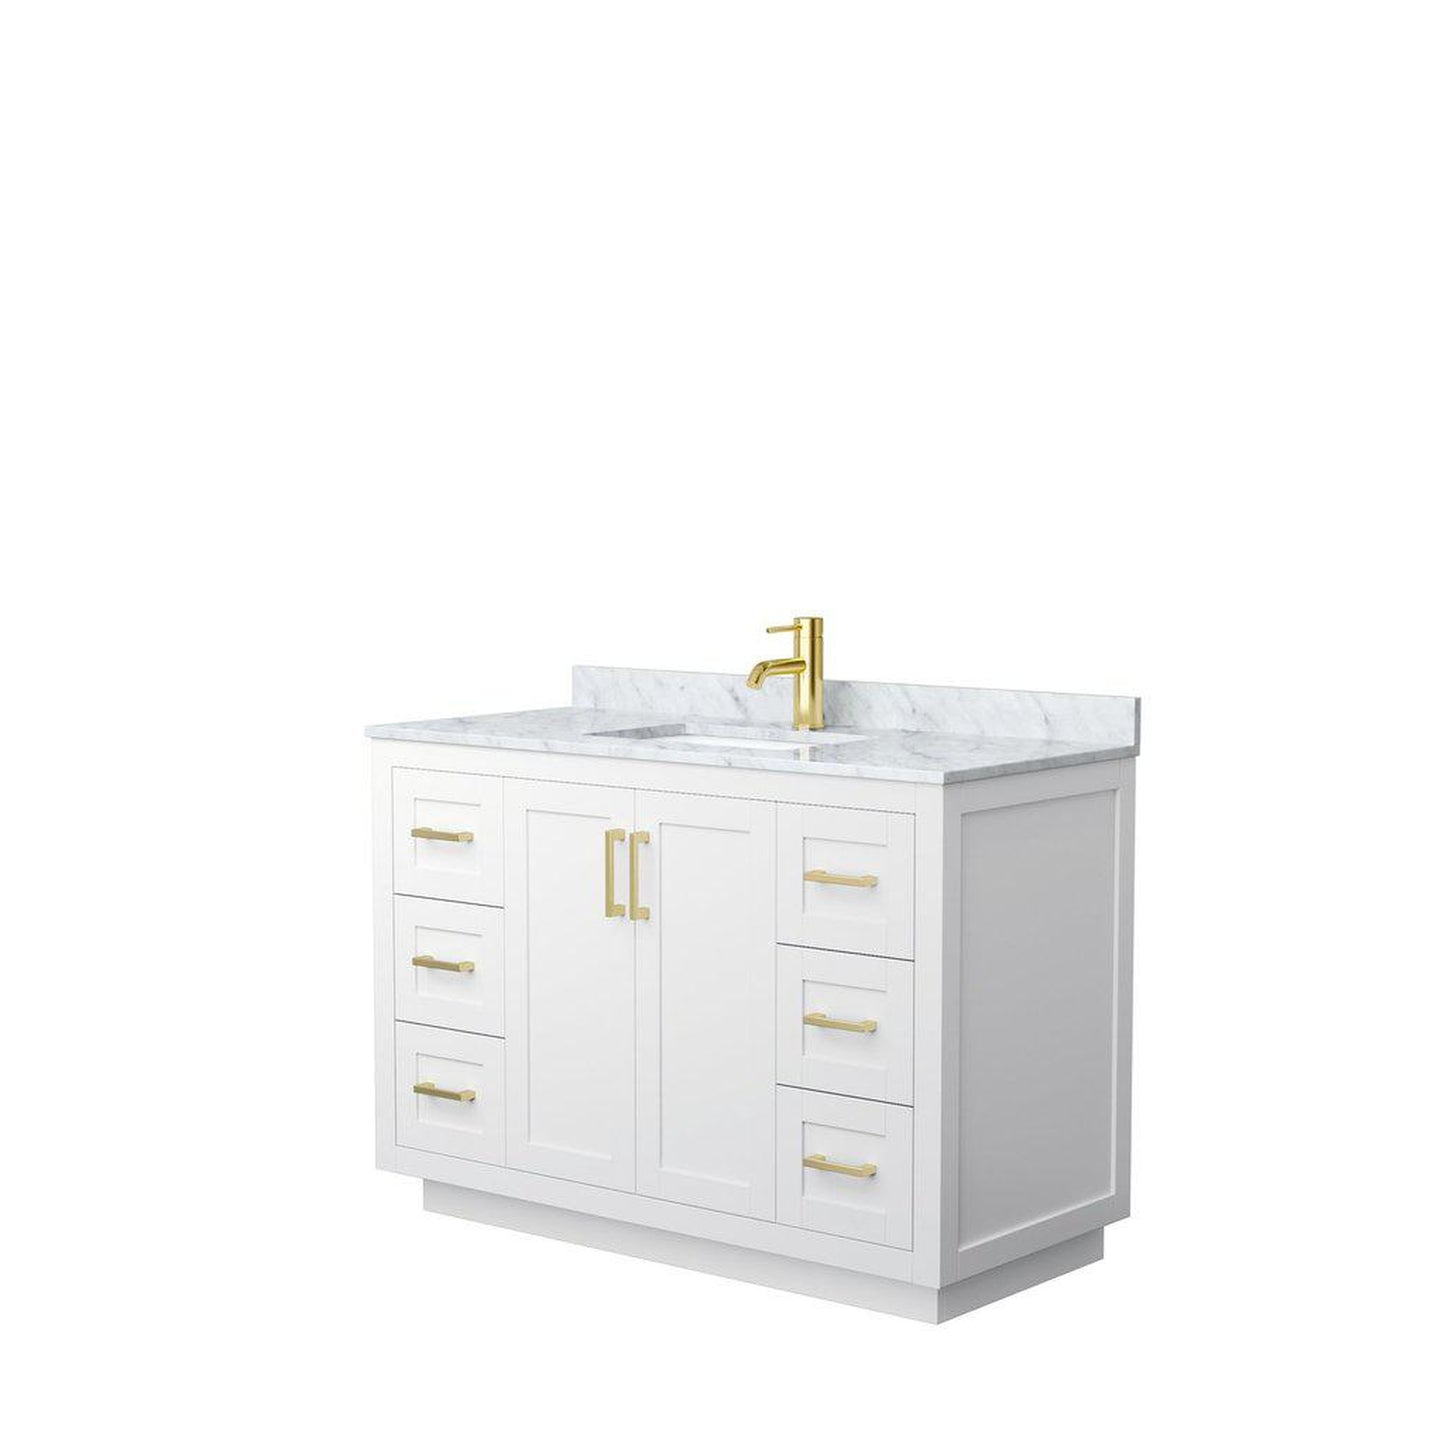 Wyndham Collection Miranda 48" Single Bathroom White Vanity Set With White Carrara Marble Countertop, Undermount Square Sink, And Brushed Gold Trim